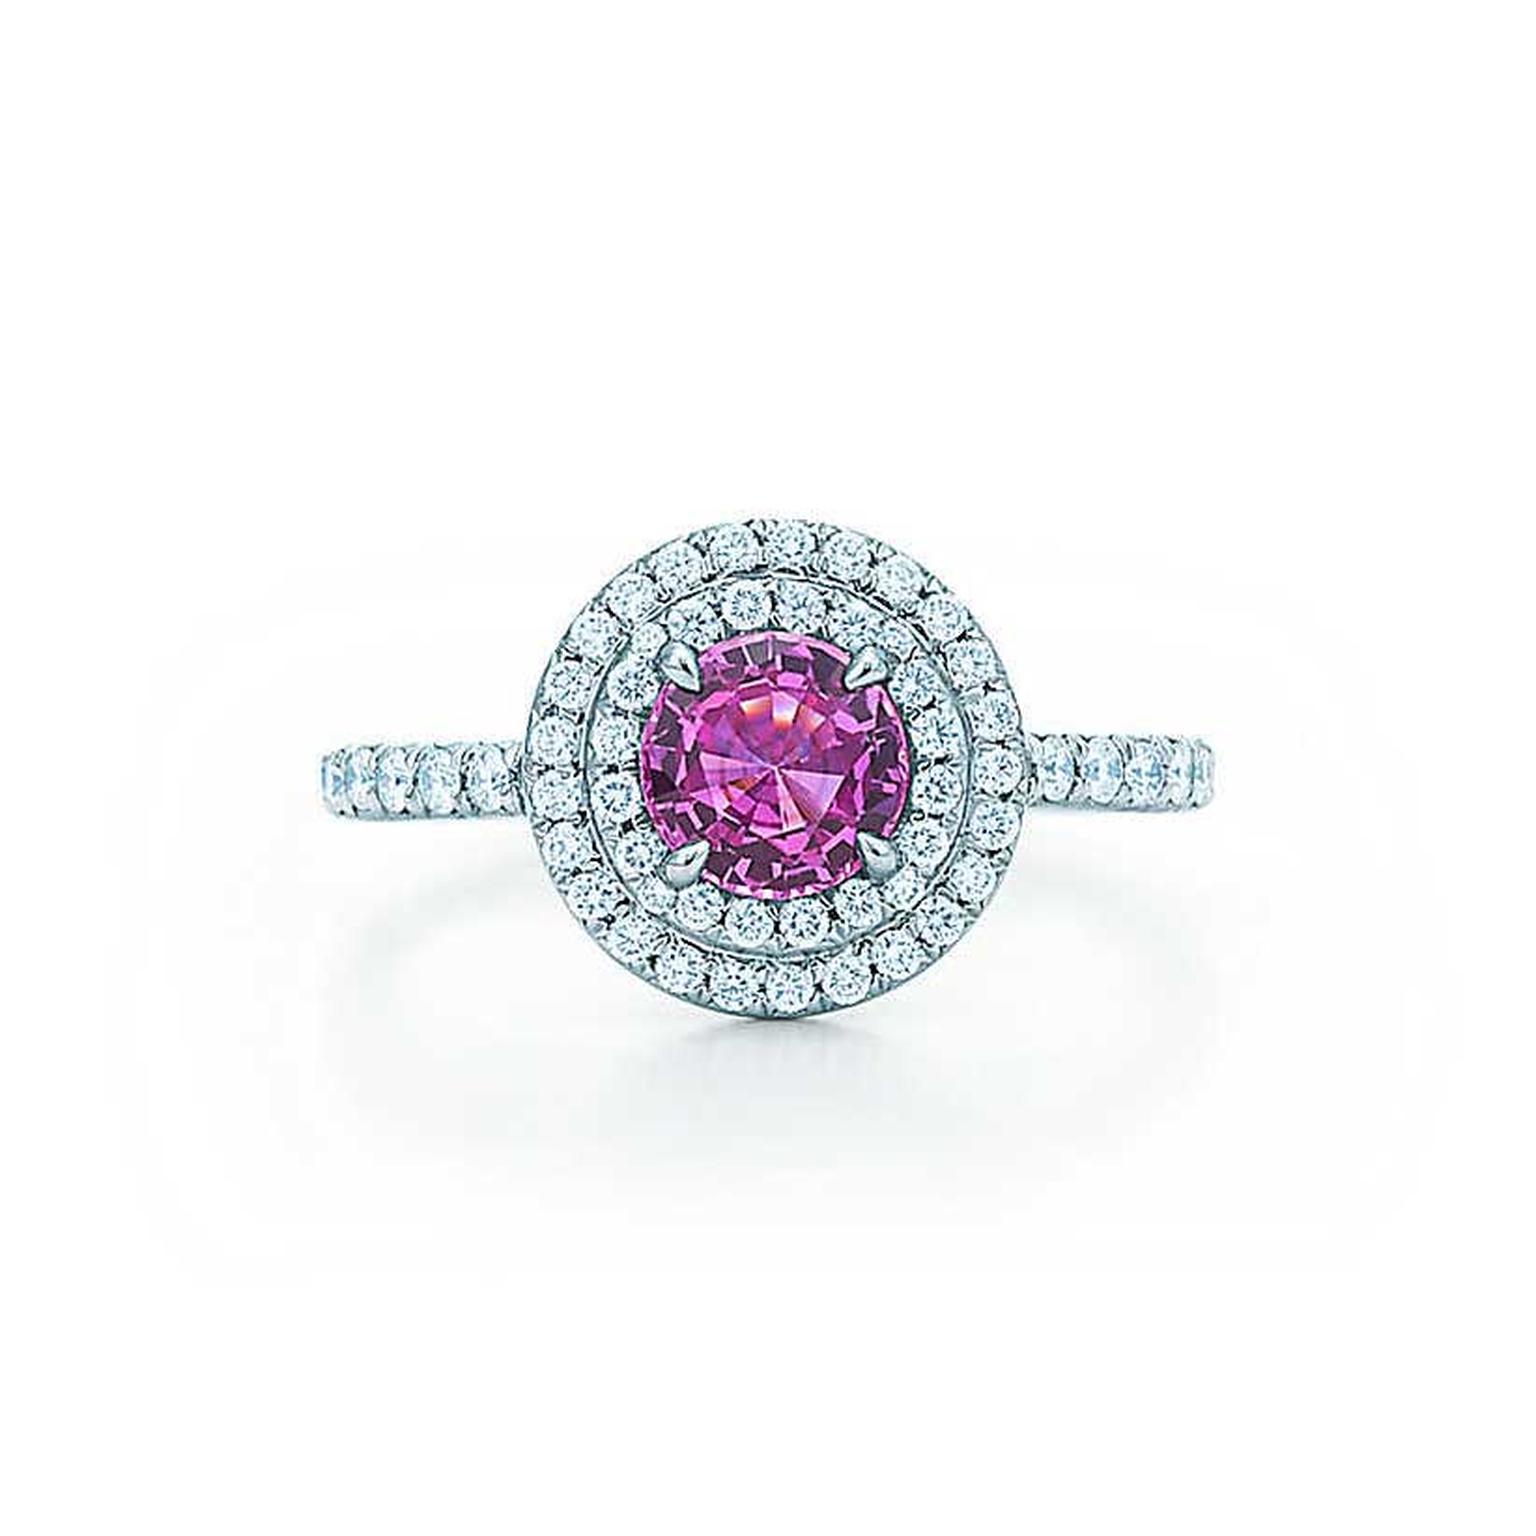 Tiffany & Co. pink sapphire and diamond Soleste ring (£5,950).